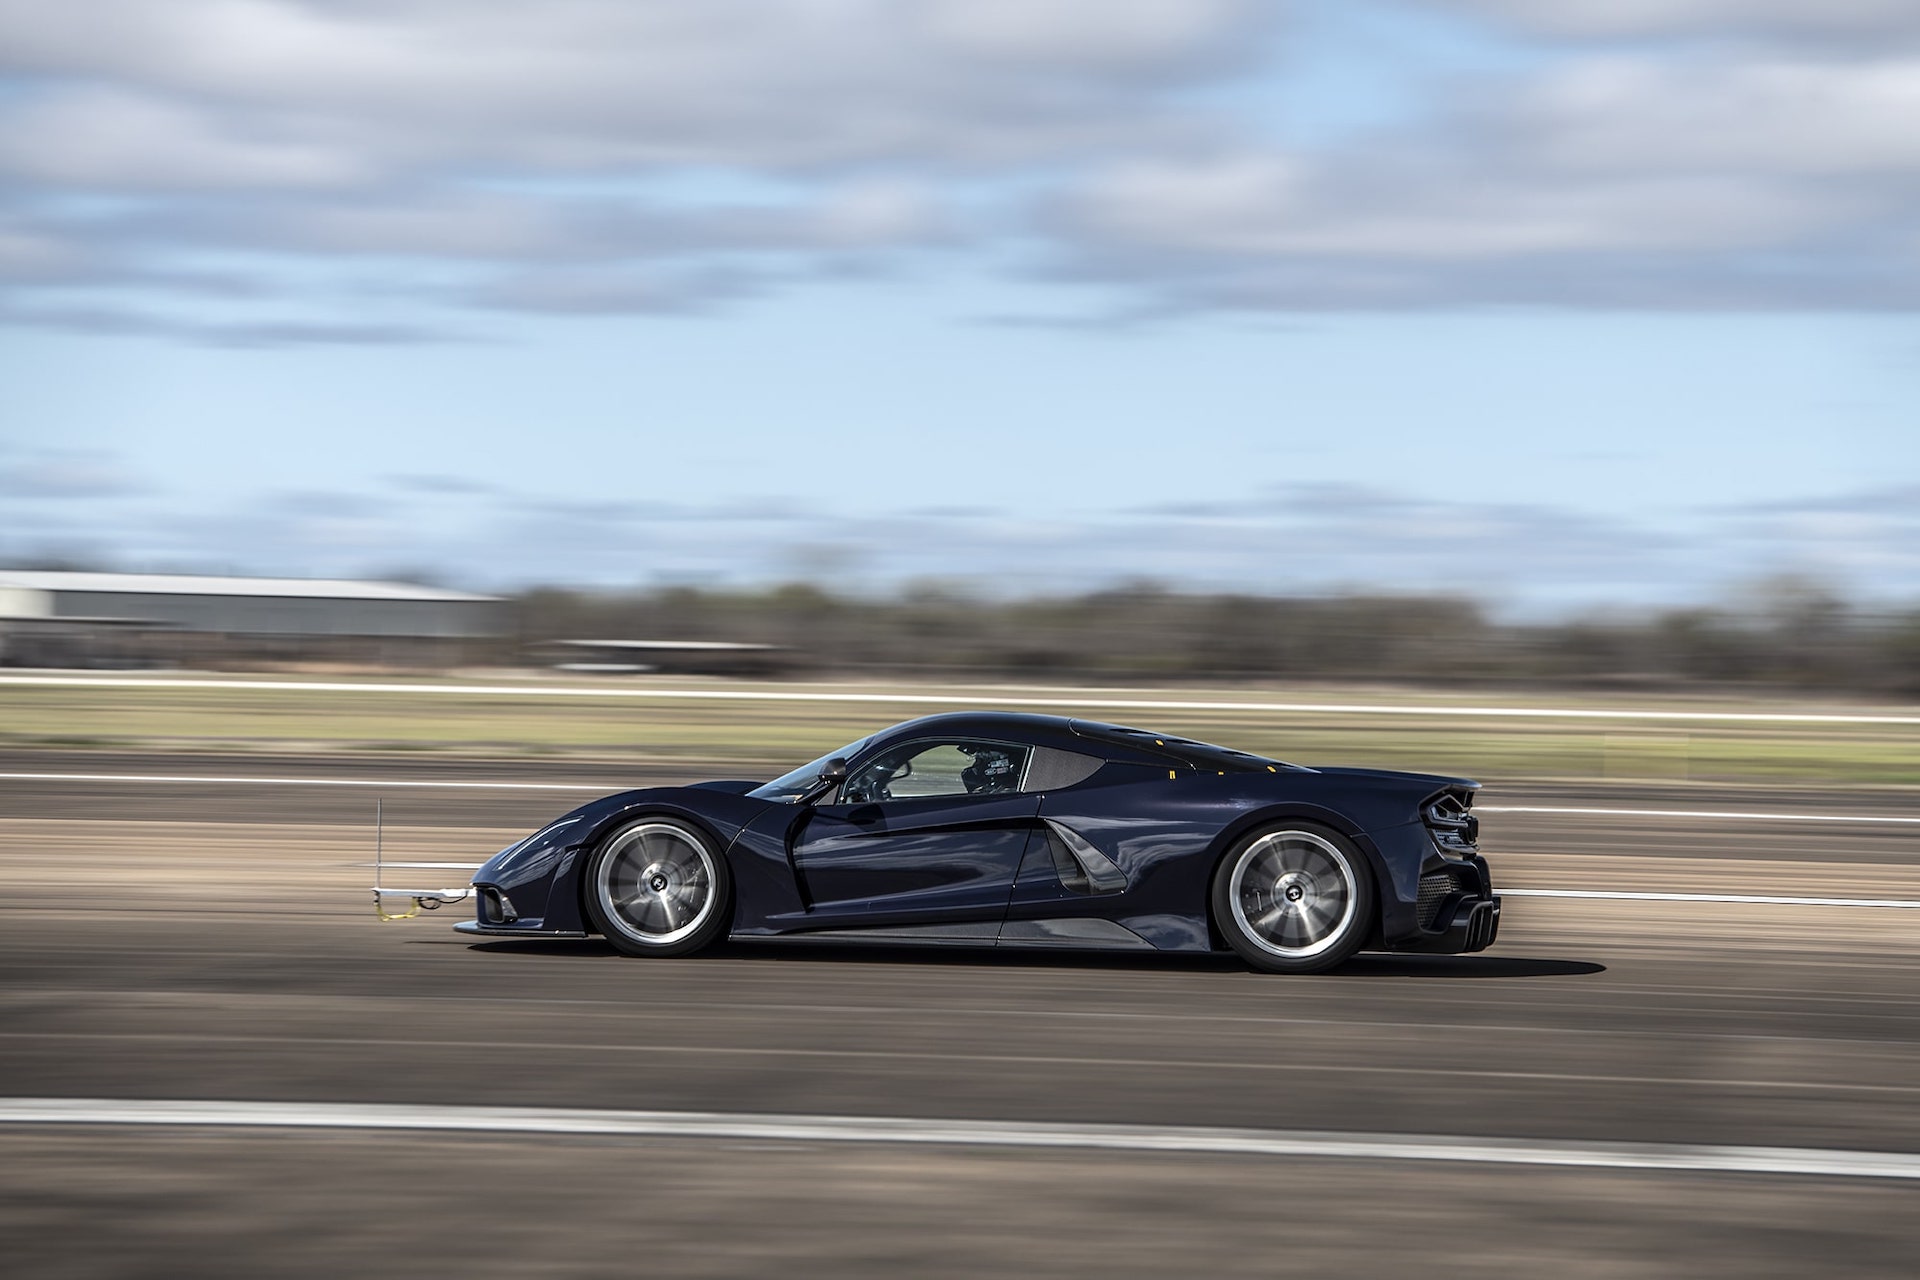 An image of a Hennessey Performance Venom F5 out on a racetrack.